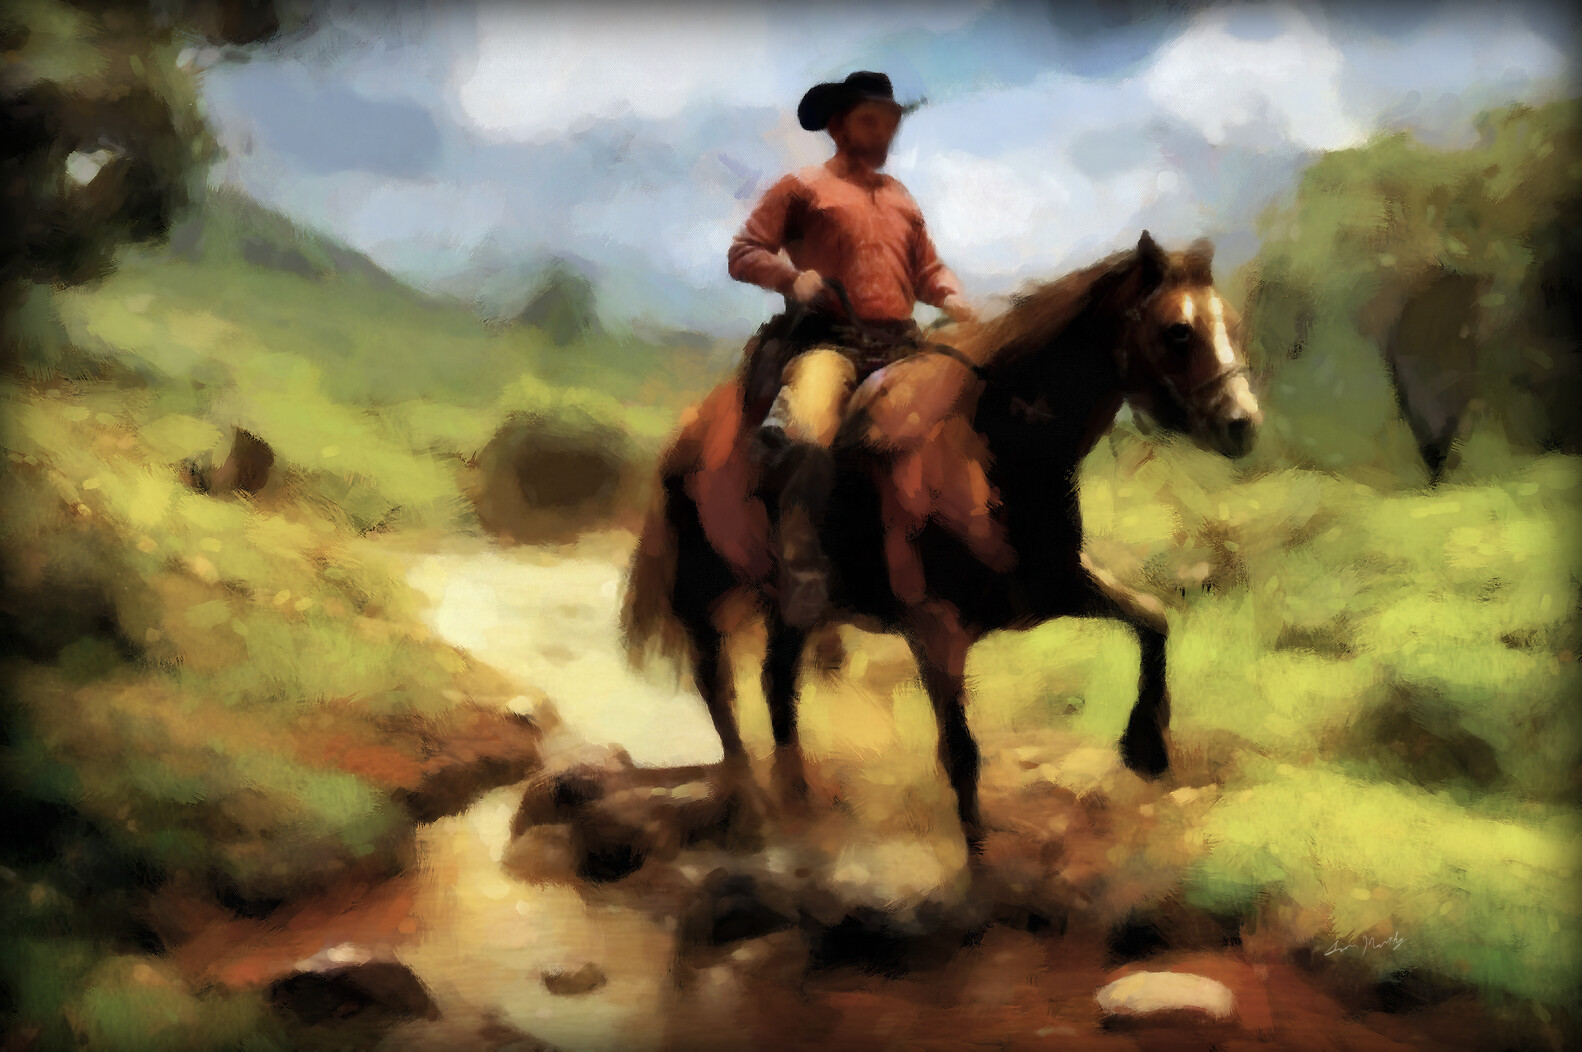 Digital painting of "Horse Trail on Sandy Creek" available in large prints.